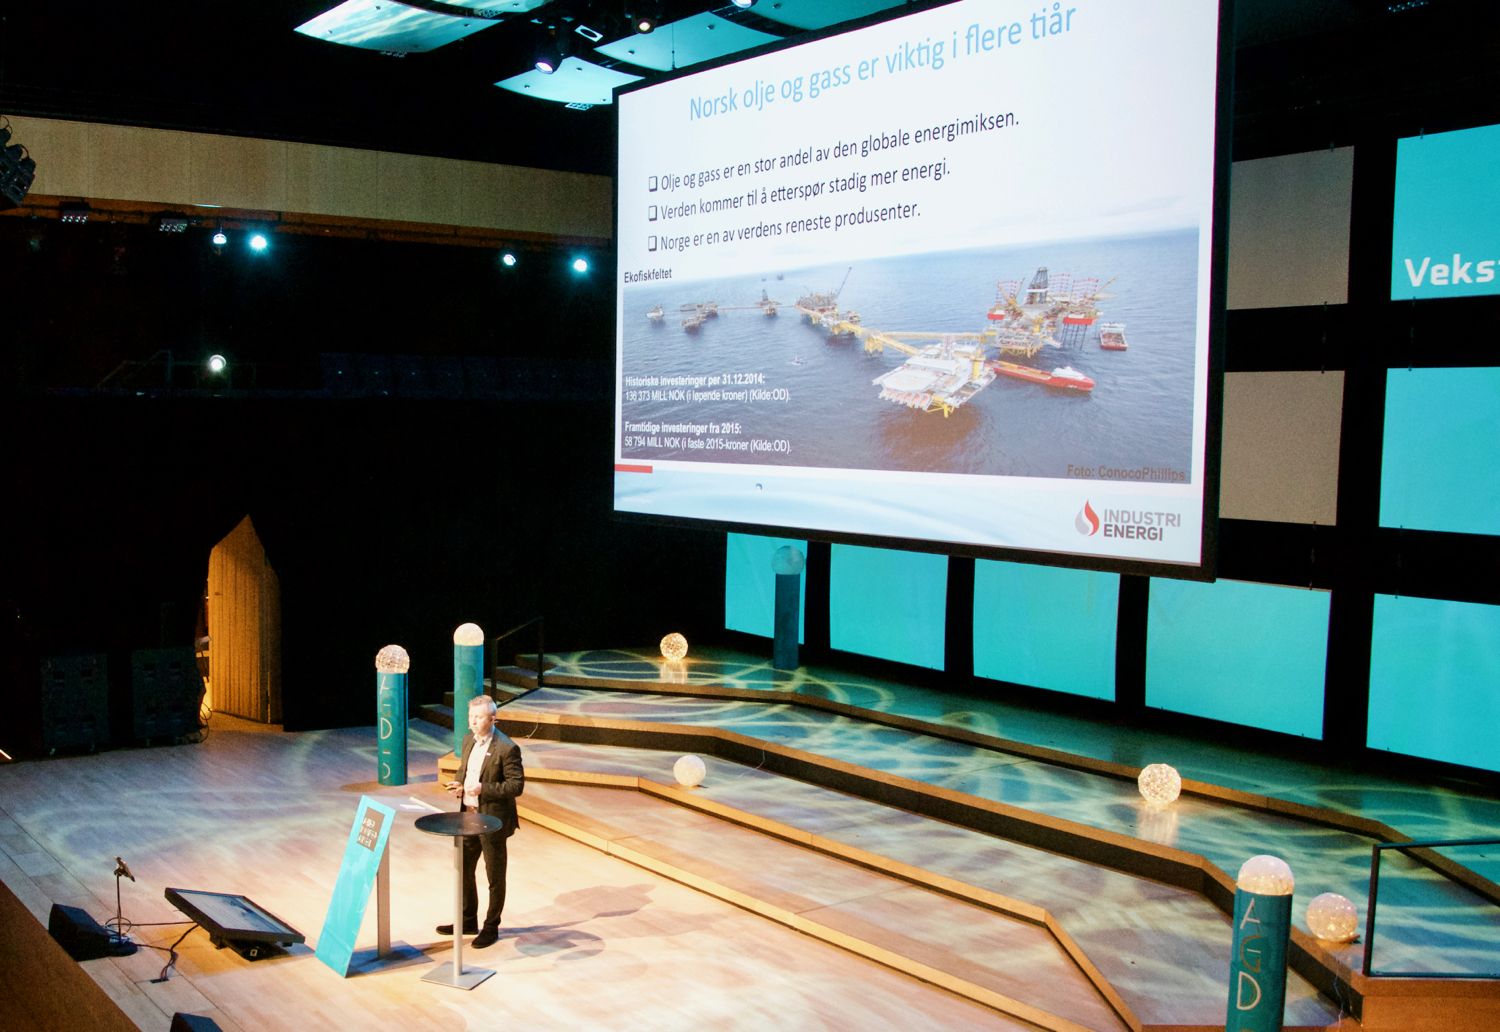  Prime Minister Erna Solberg said the oil and gas industry will be very important for Norway for decades to come. Frode Alfheim, Vice President of the labor organization Industri Energi, oil and gas will serve as an enabler of a green shift.